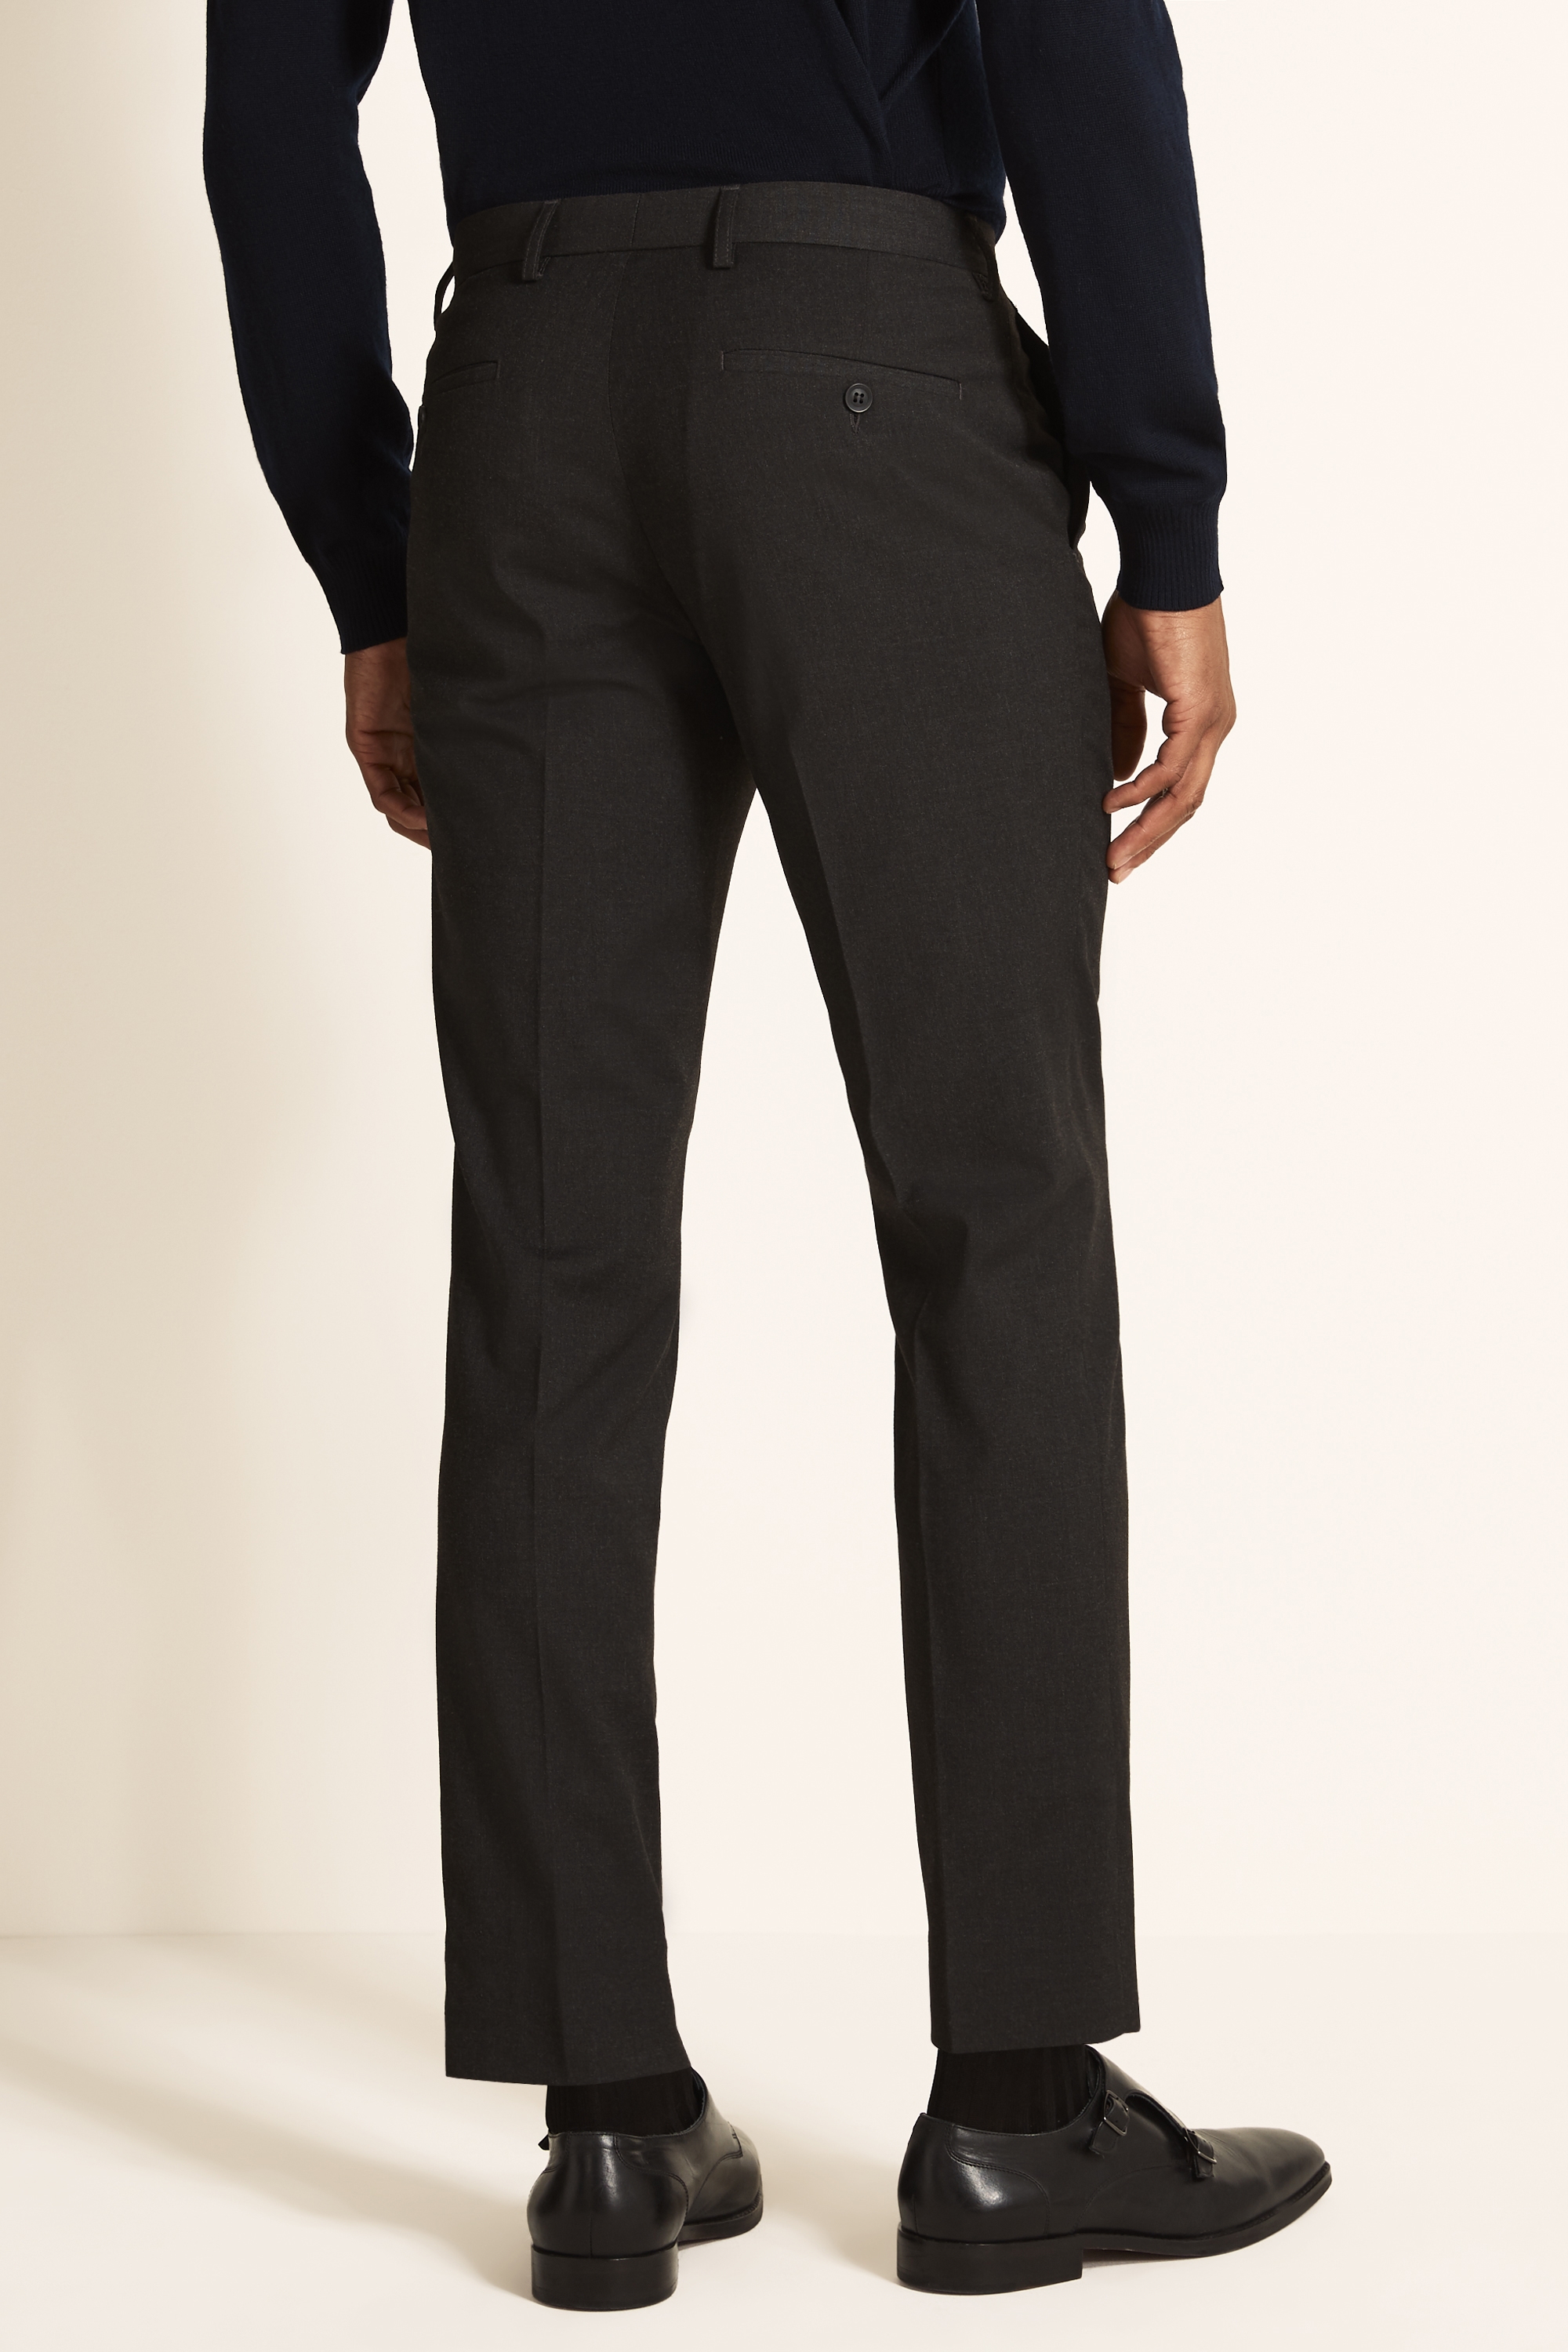 Slim Fit Charcoal Stretch Trousers | Buy Online at Moss